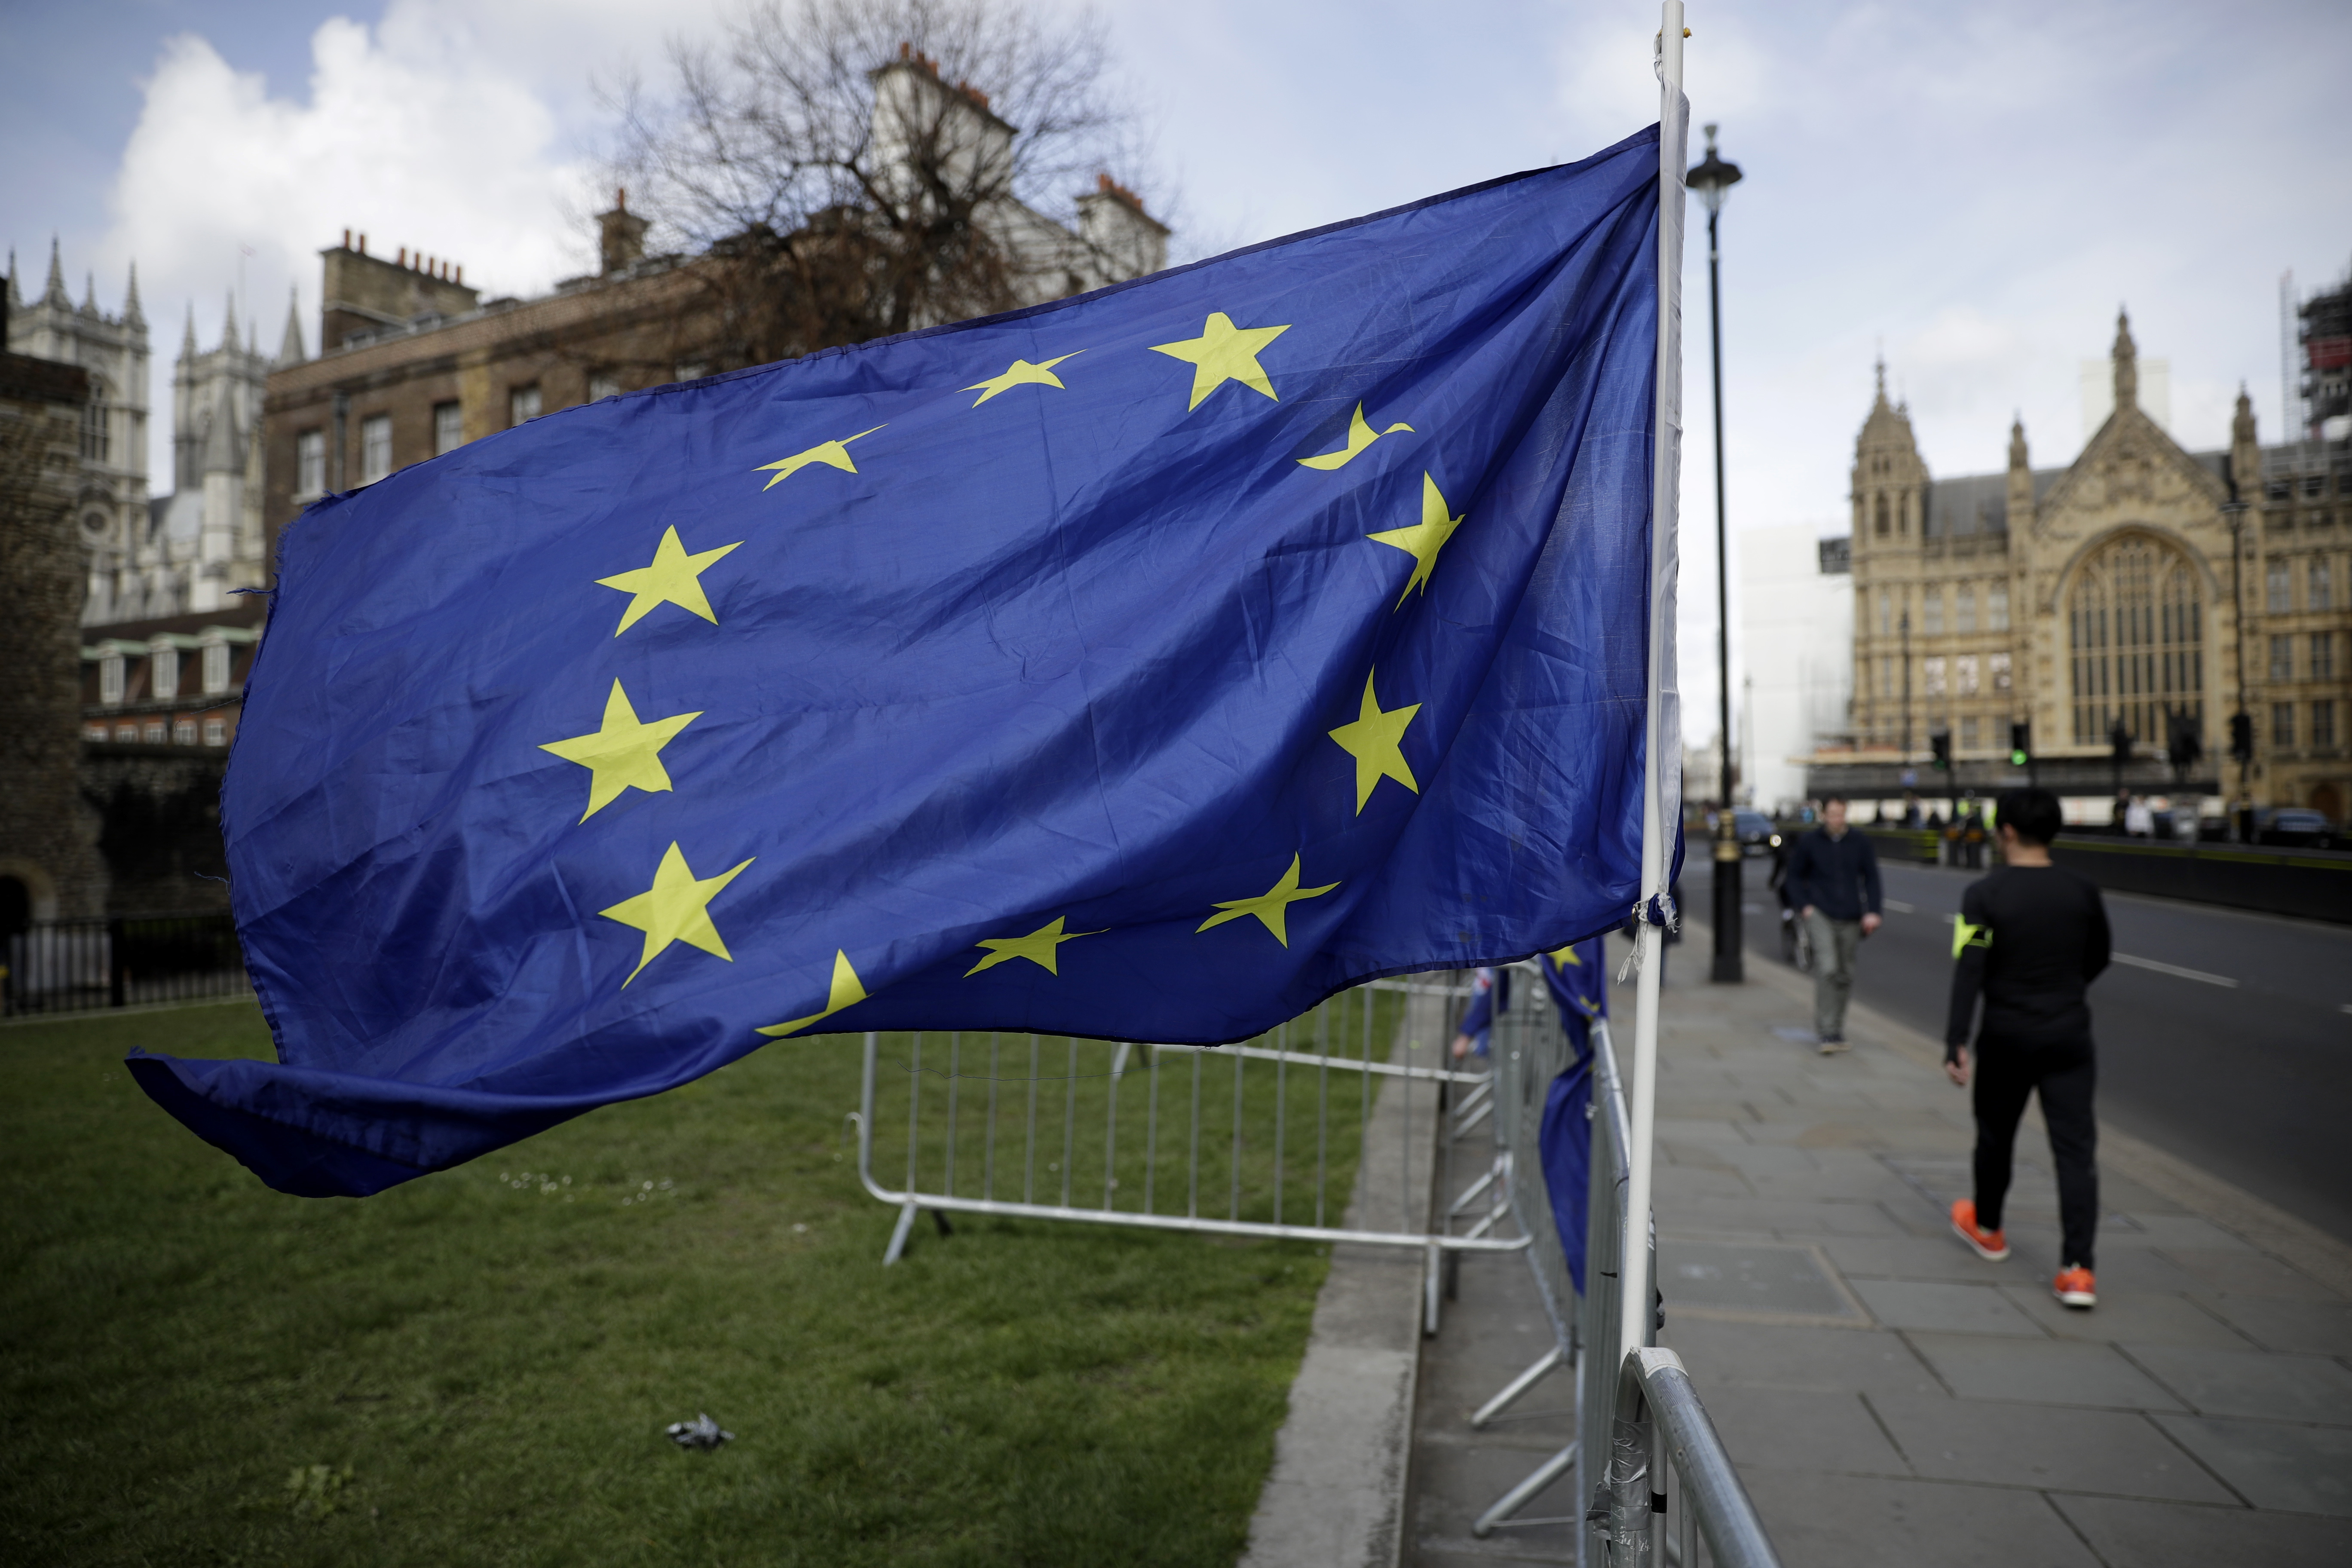 A European flag placed by anti-Brexit remain in the European Union supporters flies backdropped by the Houses of Parliament, at right, in London, Monday, March 18, 2019. British Prime Minister Theresa May was making a last-minute push Monday to win support for her European Union divorce deal, warning opponents that failure to approve it would mean a long — and possibly indefinite — delay to Brexit. Parliament has rejected the agreement twice, but May aims to try a third time this week if she can persuade enough lawmakers to change their minds. (AP Photo/Matt Dunham)